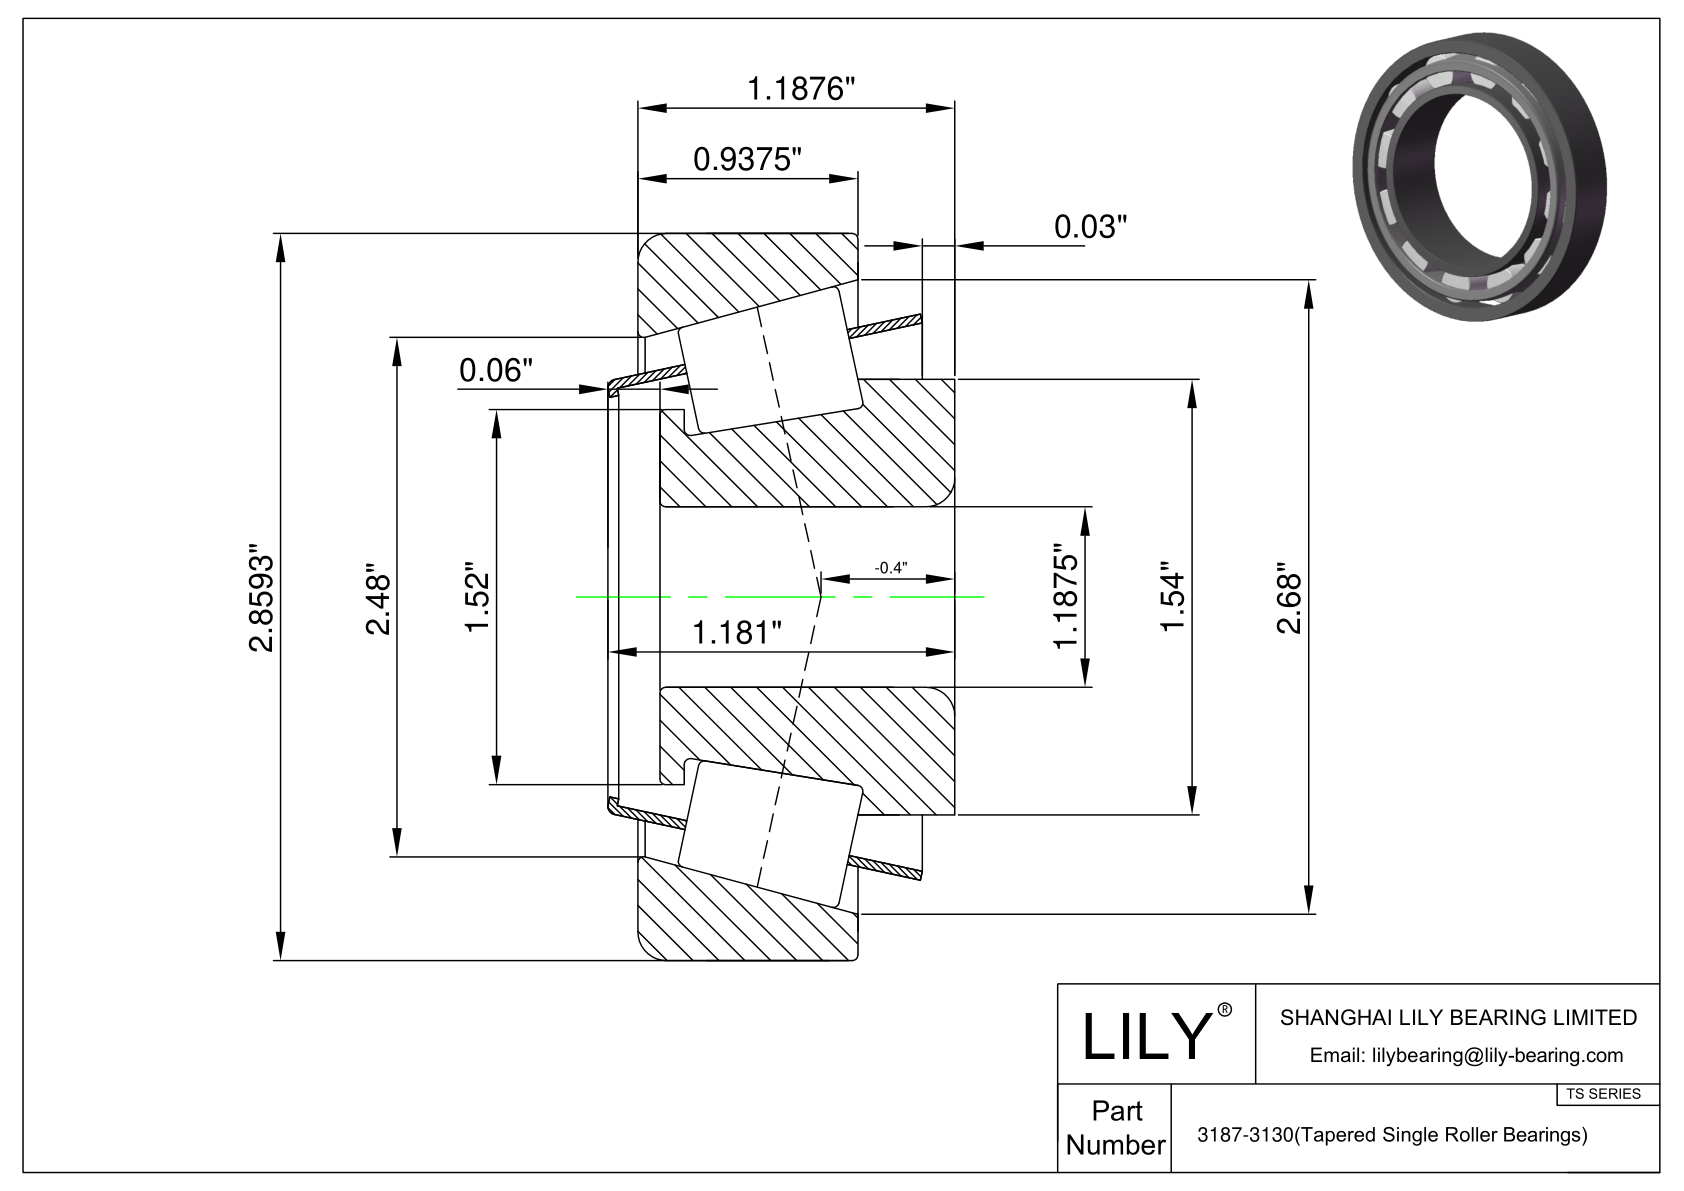 3187-3130 TS (Tapered Single Roller Bearings) (Imperial) cad drawing